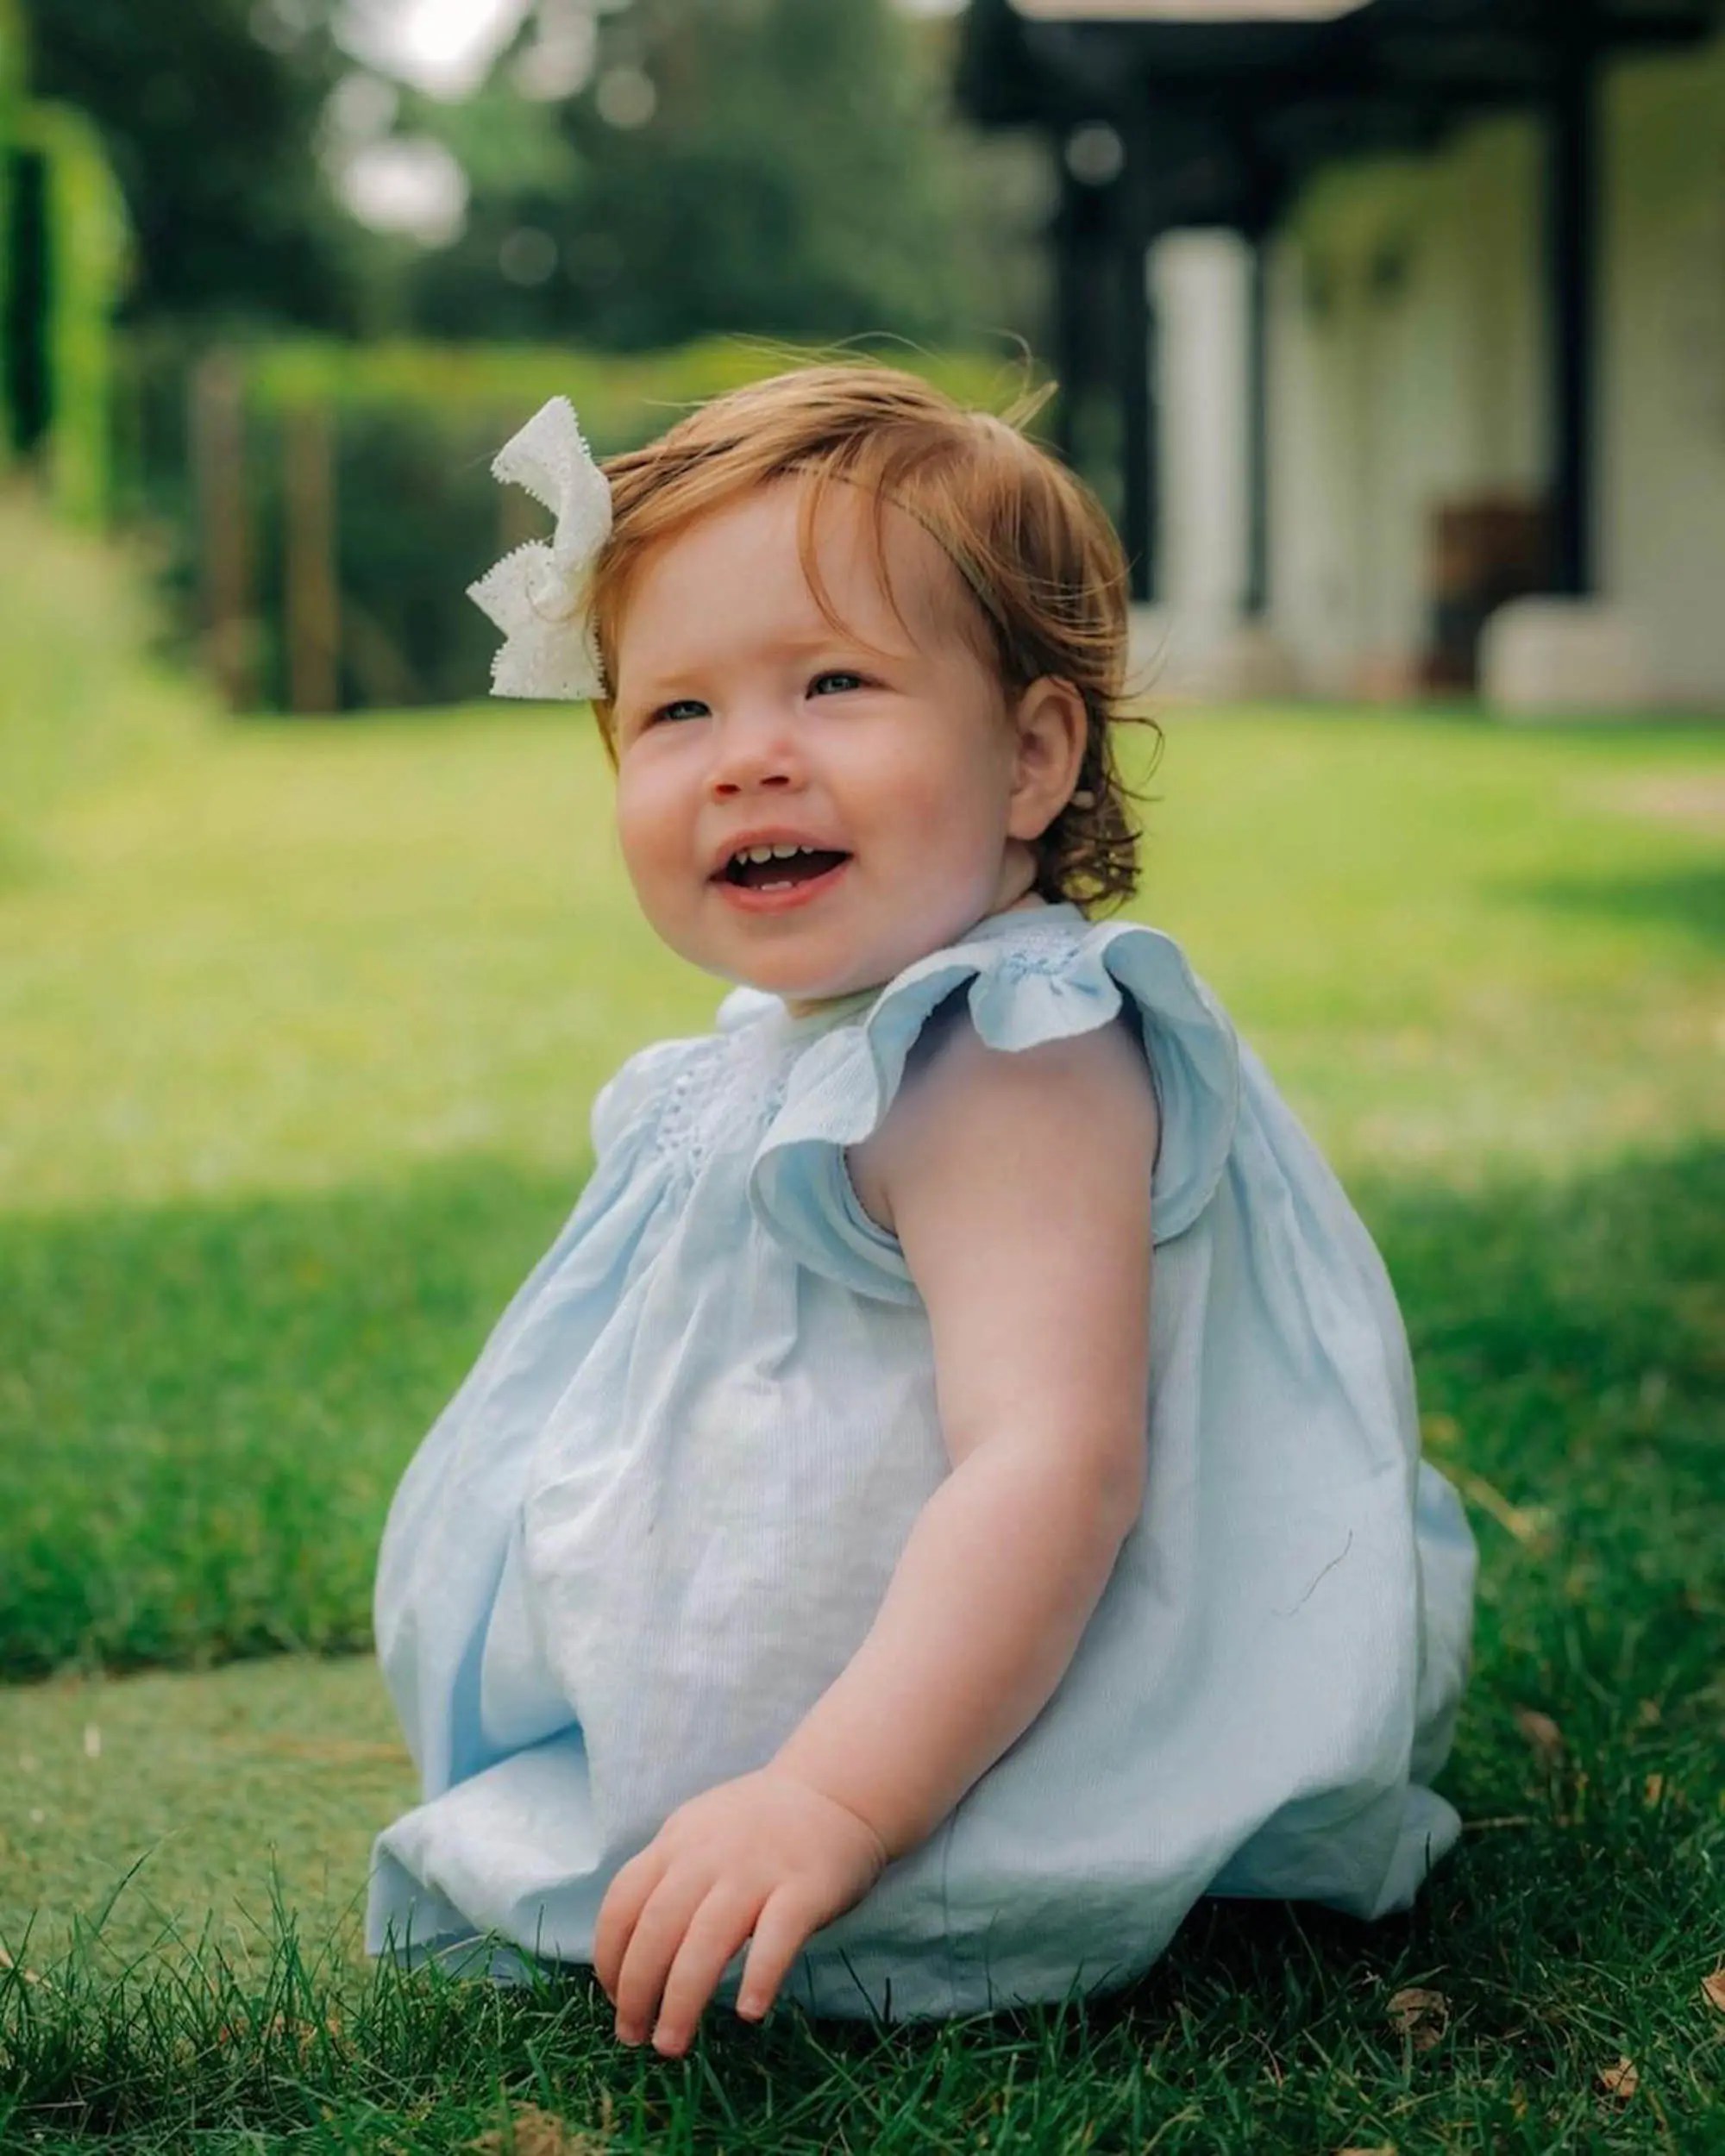 Princess Lilibet Diana, pictured in June 2022. (Misan Harriman/Prince Harry and Meghan, The Duke and Duchess of Sussex)